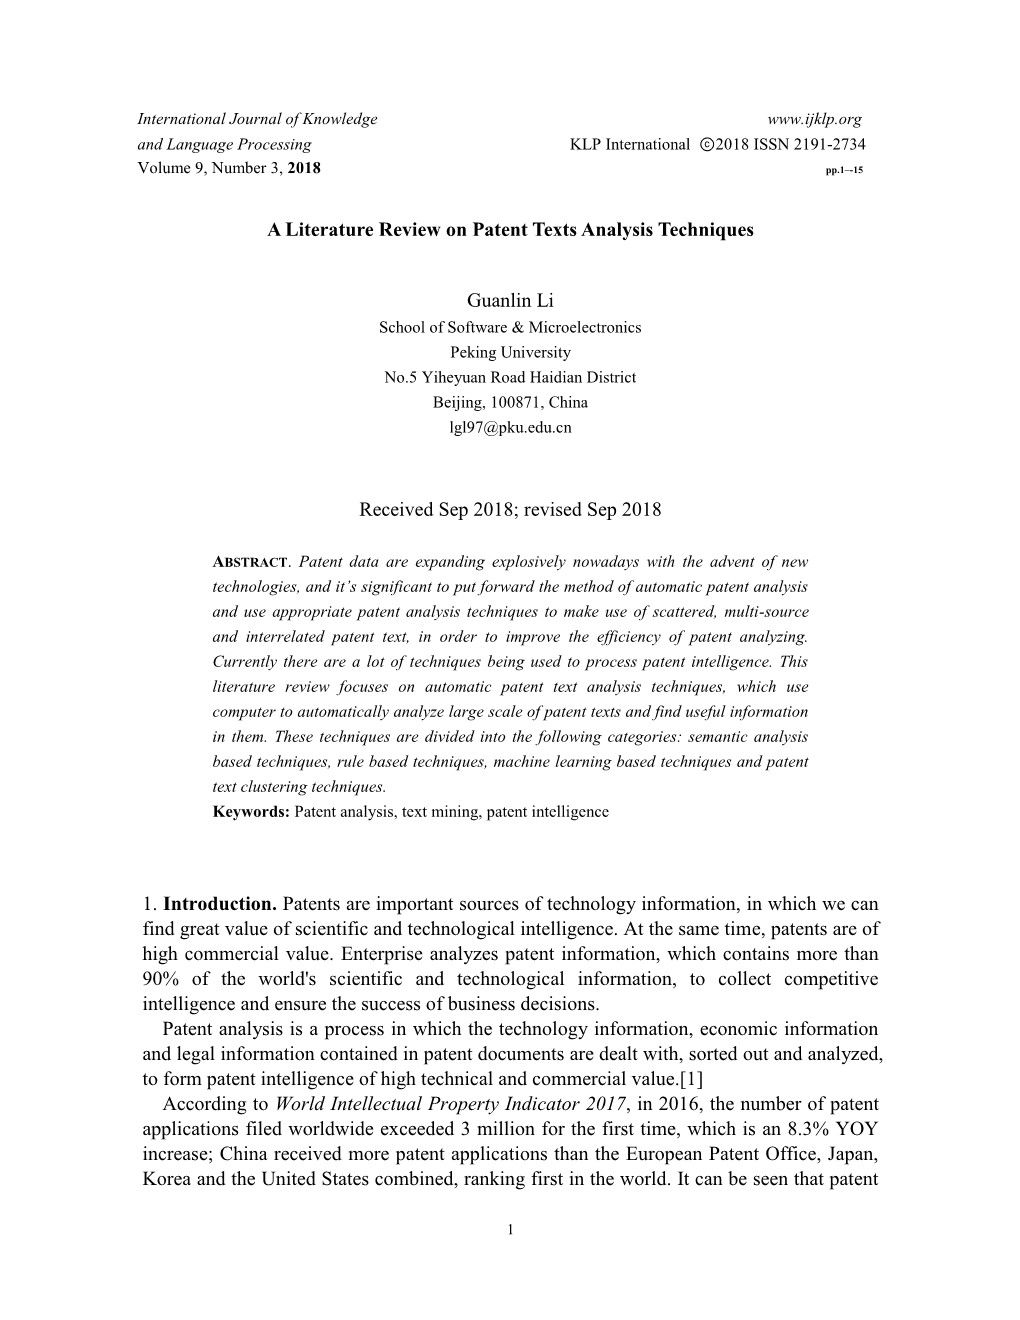 A Literature Review on Patent Texts Analysis Techniques Guanlin Li